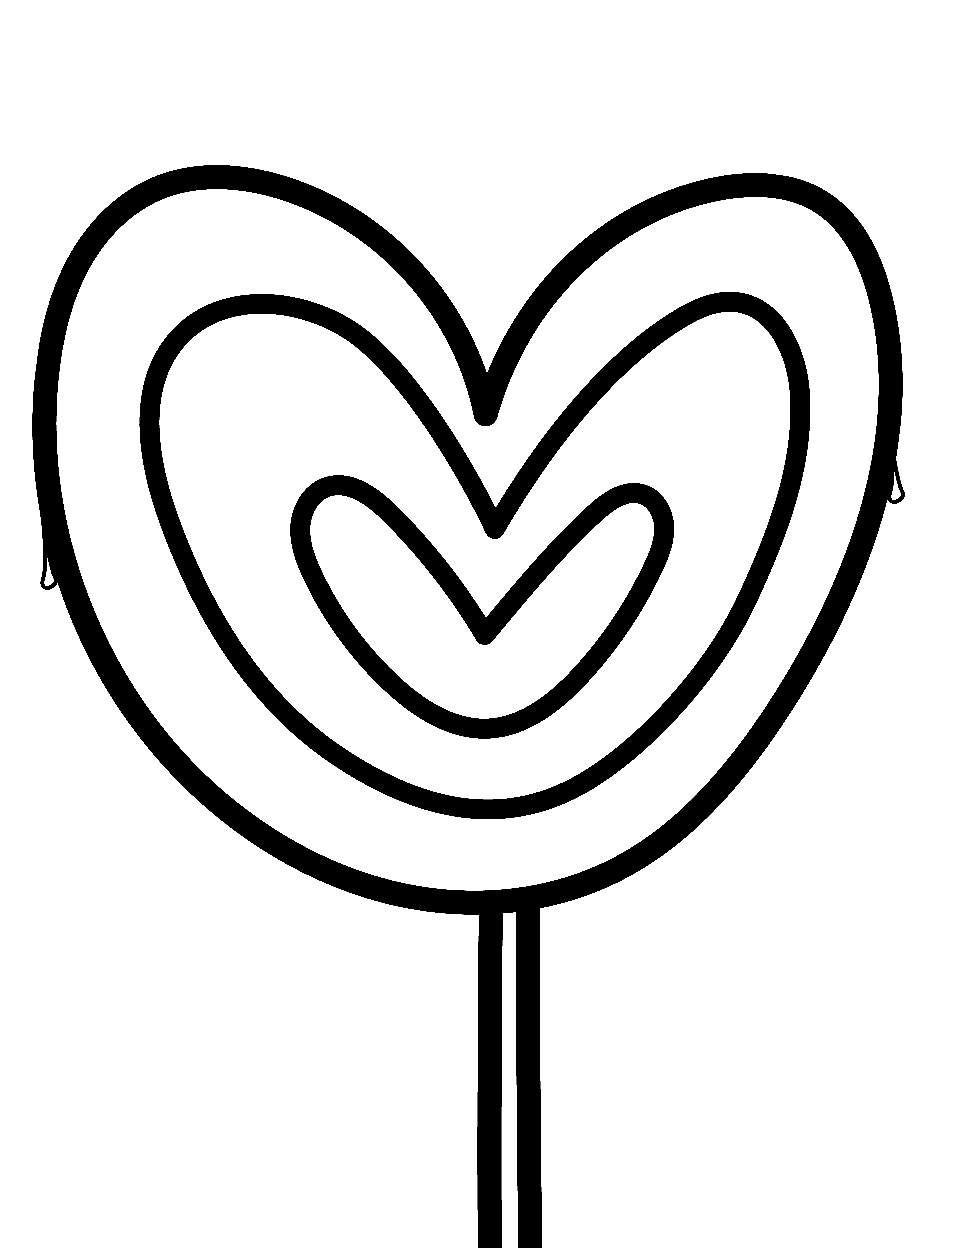 Giant Heart Lollipop Coloring Page - A big heart-shaped lollipop with patterns.